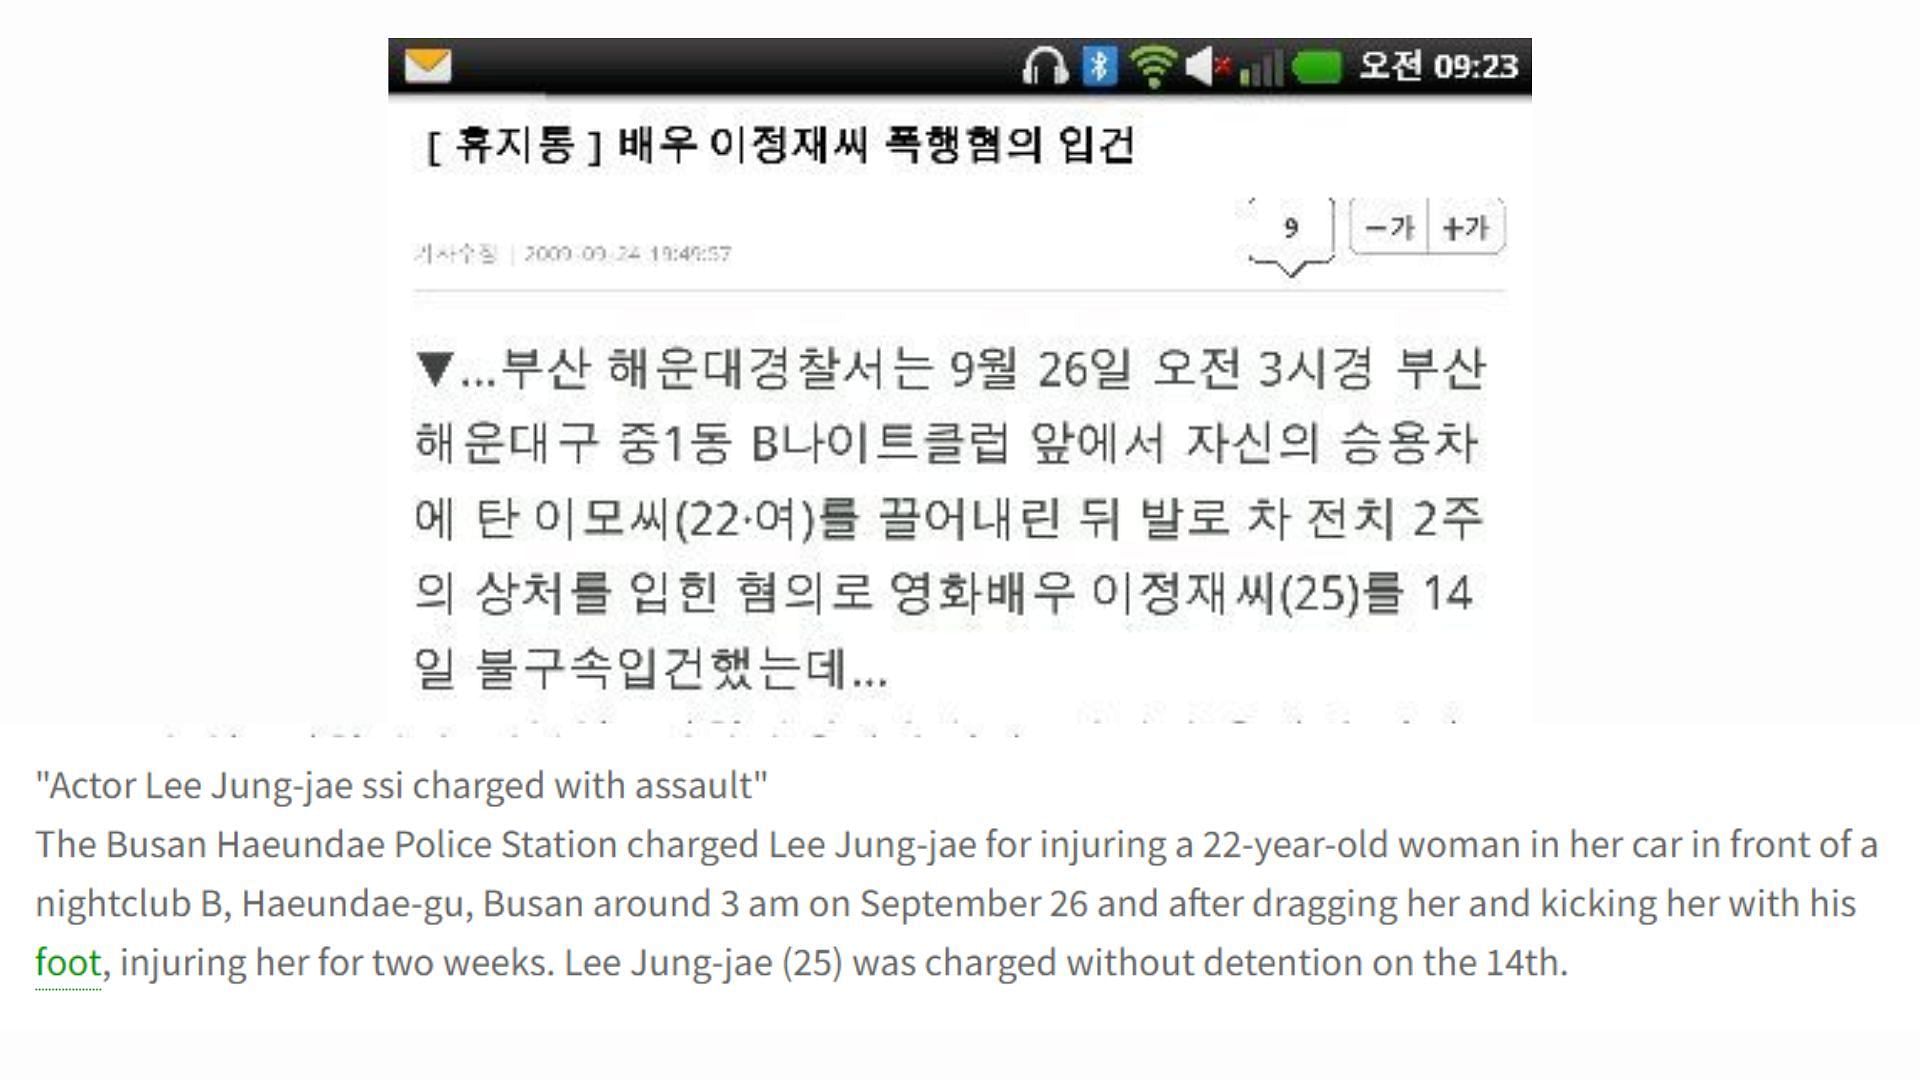 Report of another assault case the actor was booked for (Images via Instiz and pannchoa)